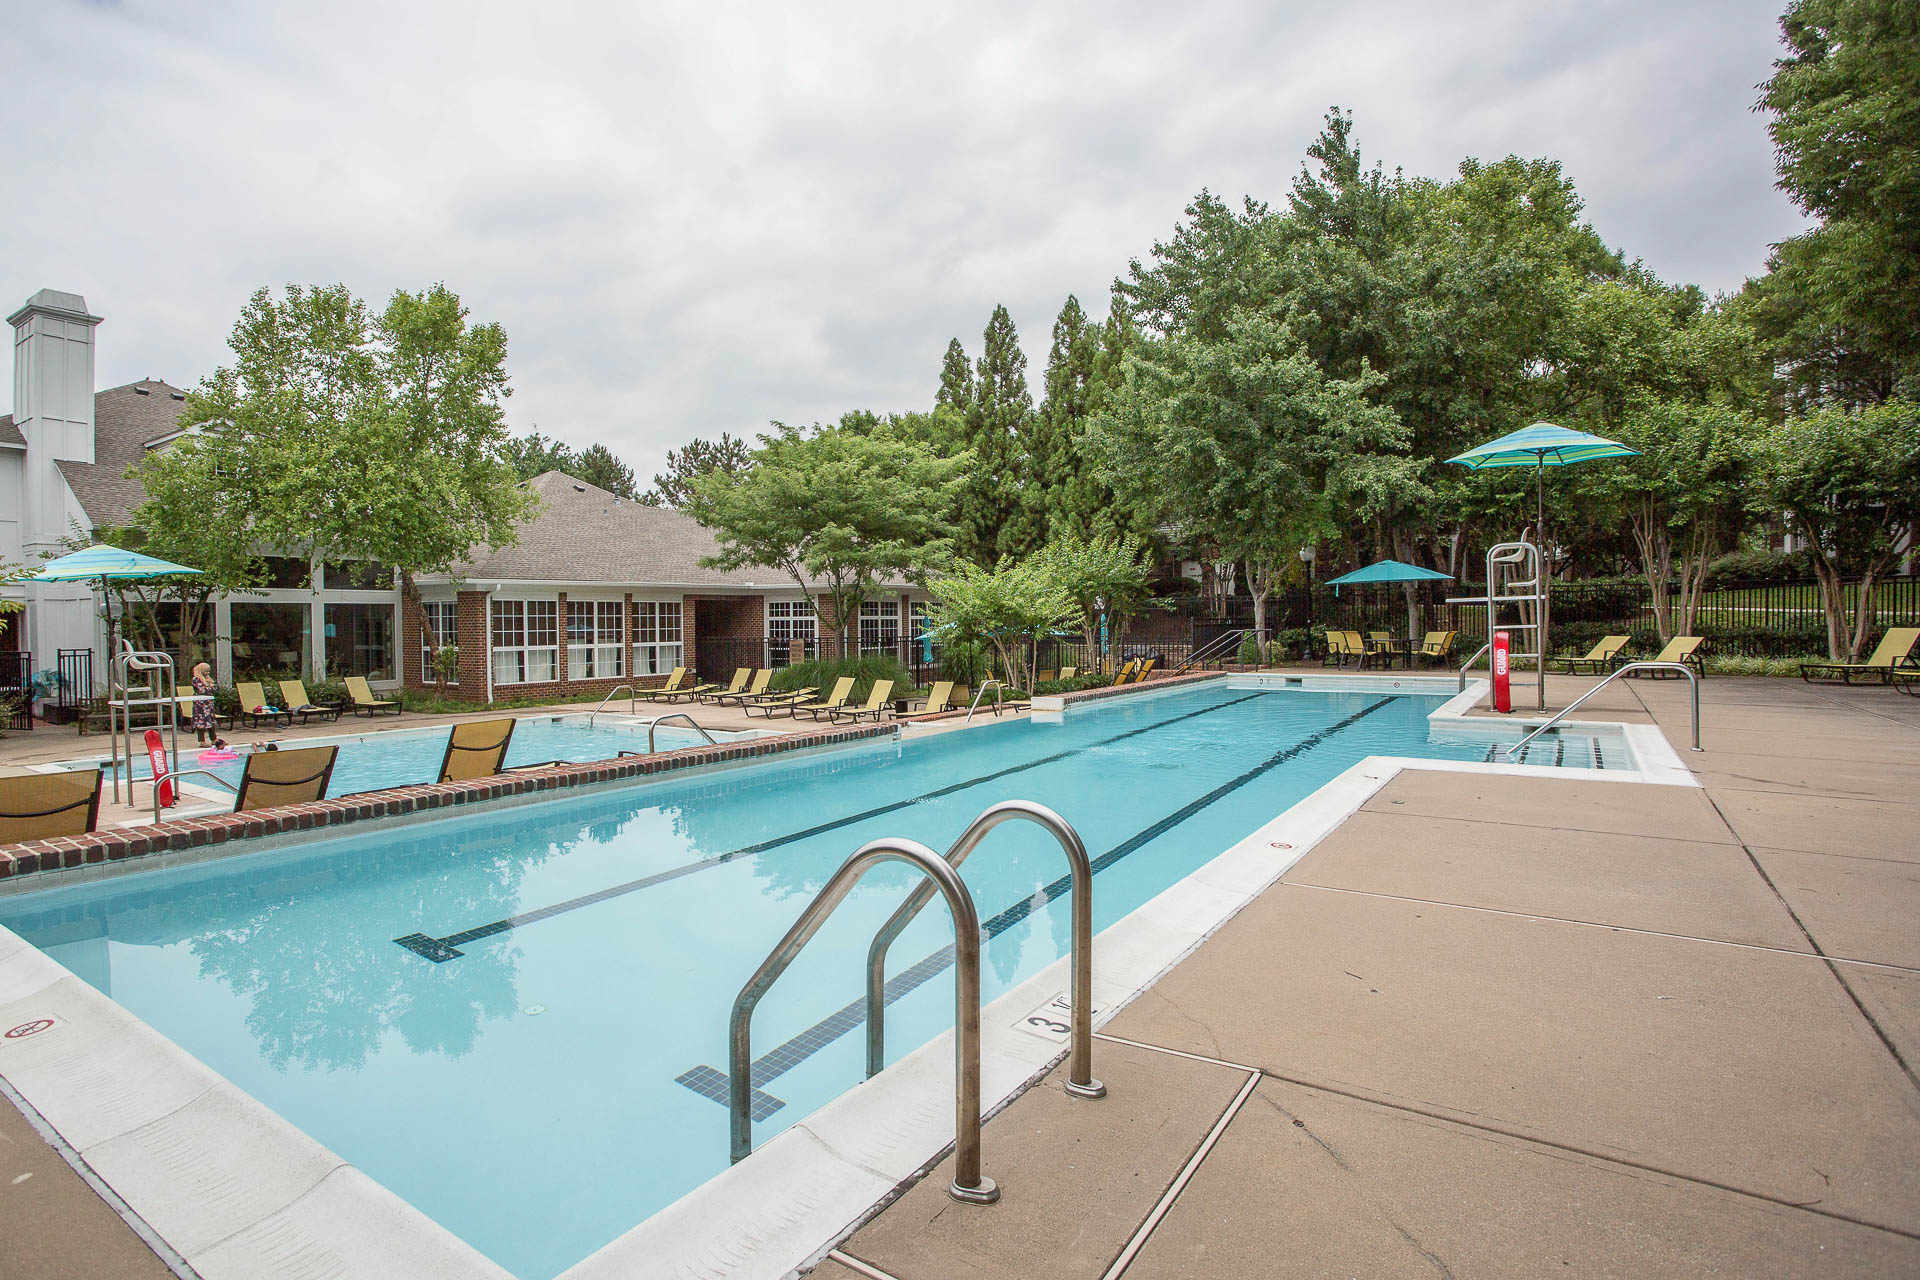 17_Furnished_Apartments_Finley_Lap_Pool.jpg